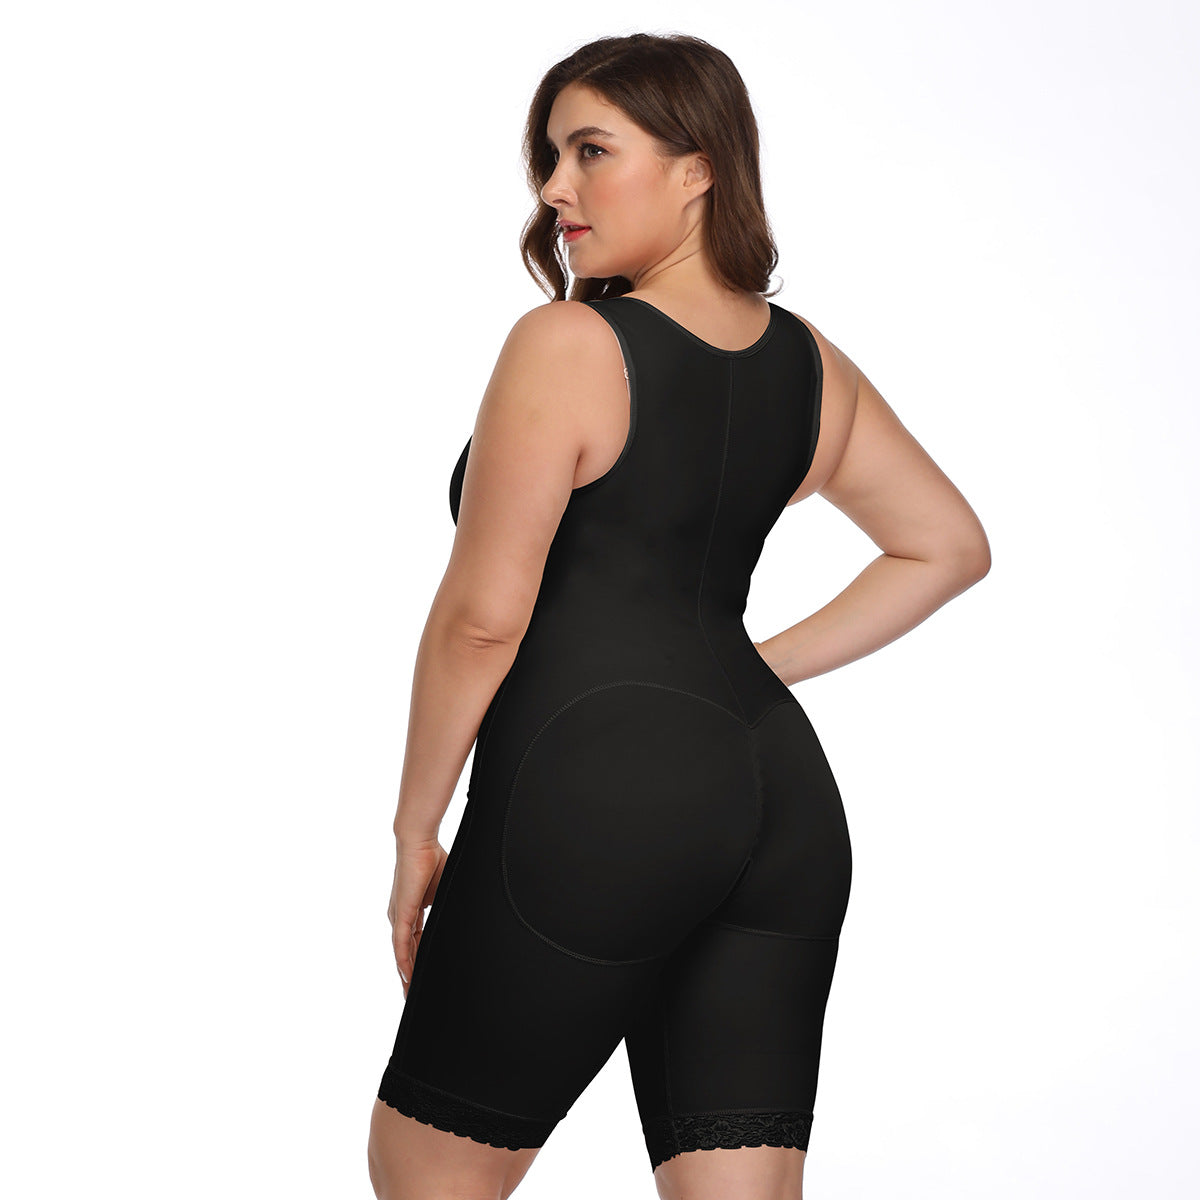 One-piece waist and butt tight shapewear